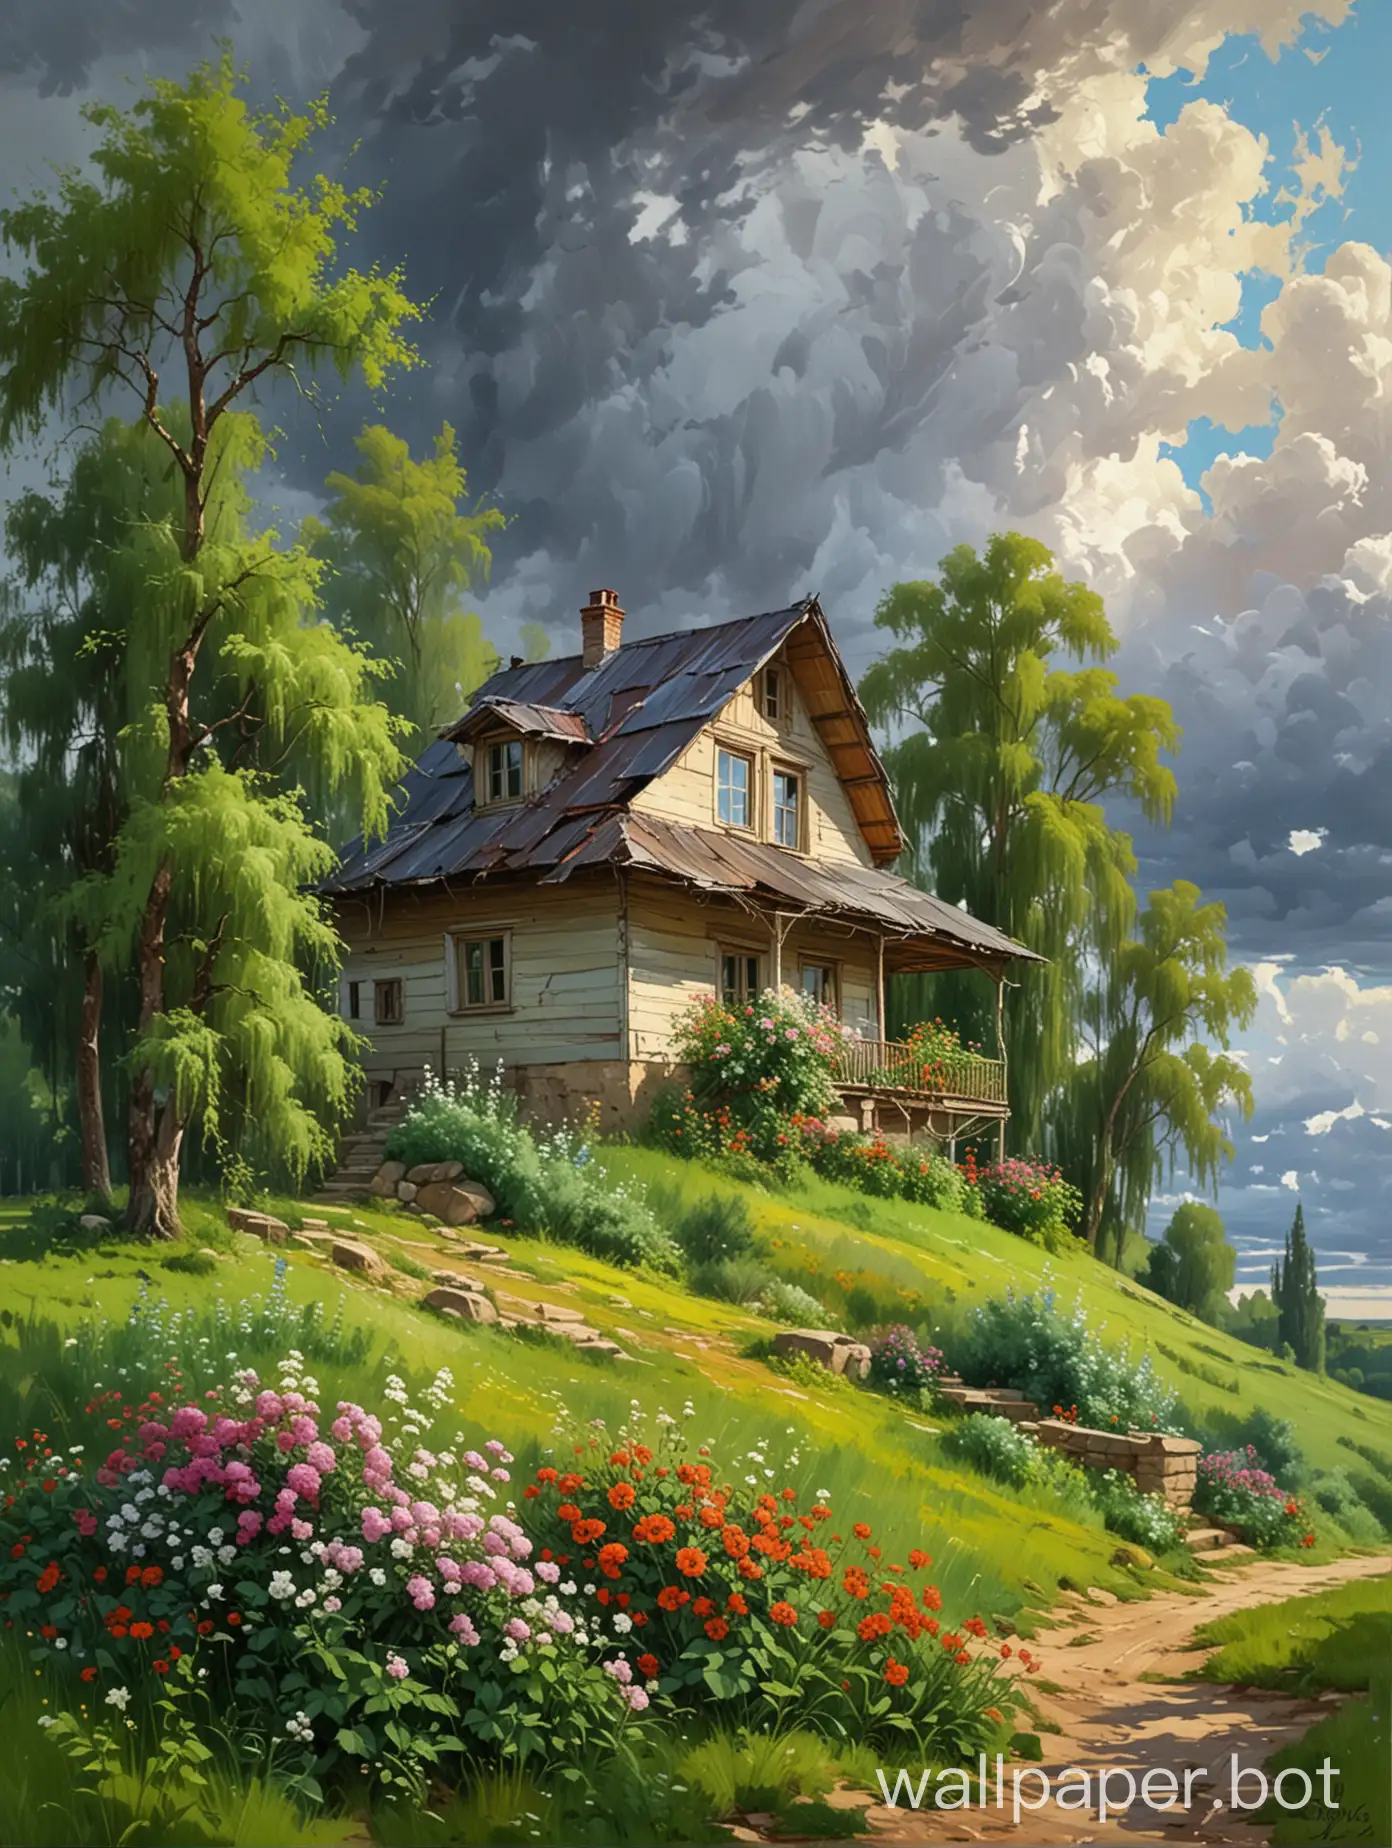 Vladimir-Gusev-Oil-Painting-Dark-Clouds-Over-Old-House-and-Lush-Green-Landscape